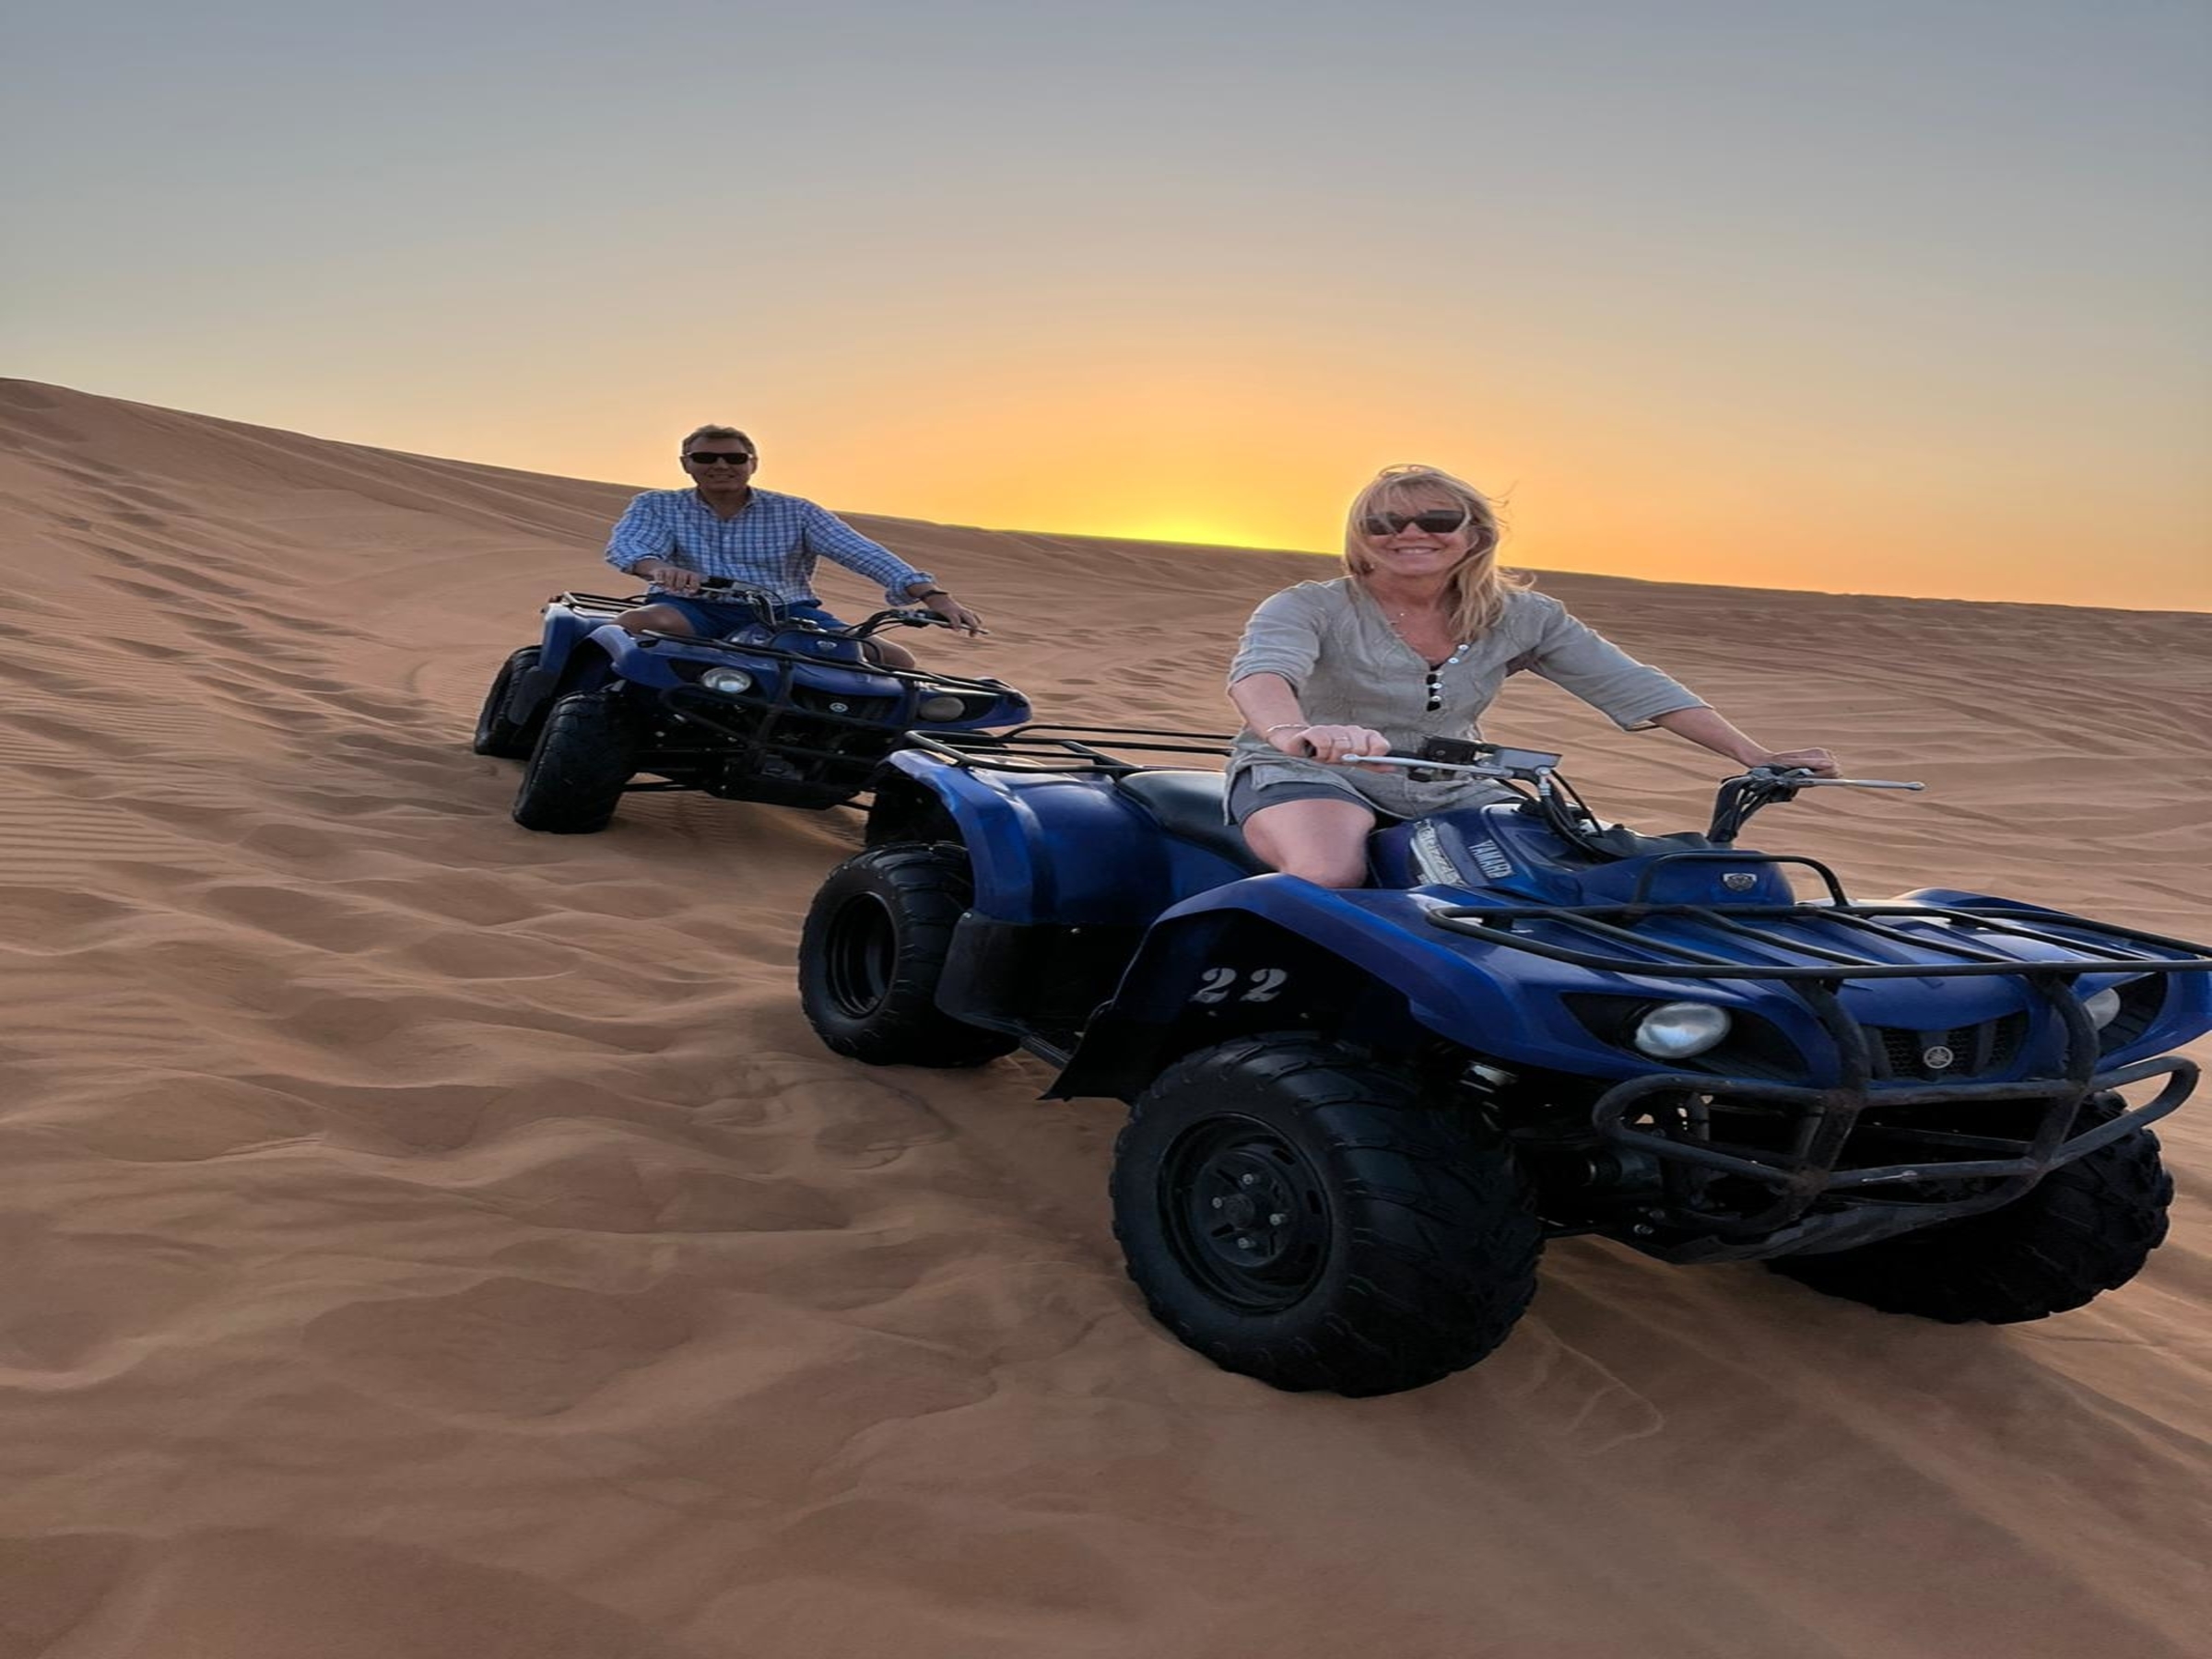 You are currently viewing Yamaha Grizzly 350cc Quad Bike Tours